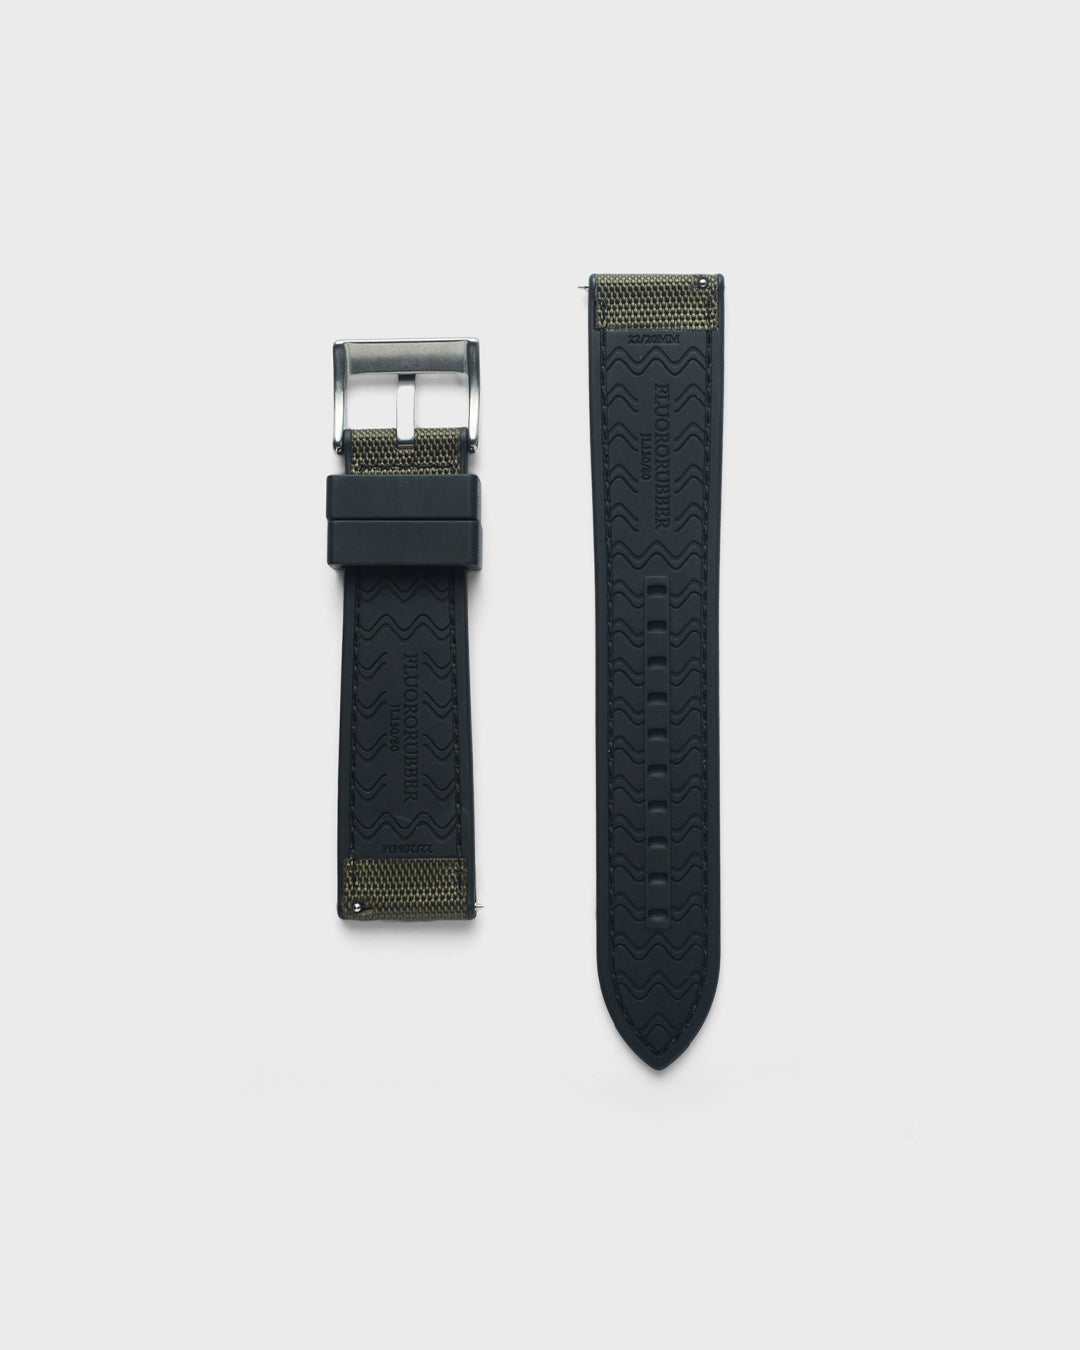 MATE STRAP - FOR QUARTZ, MECHANICAL & SMART WATCHES [Parade Stitch in Sailcloth & FKM Rubber] My Store